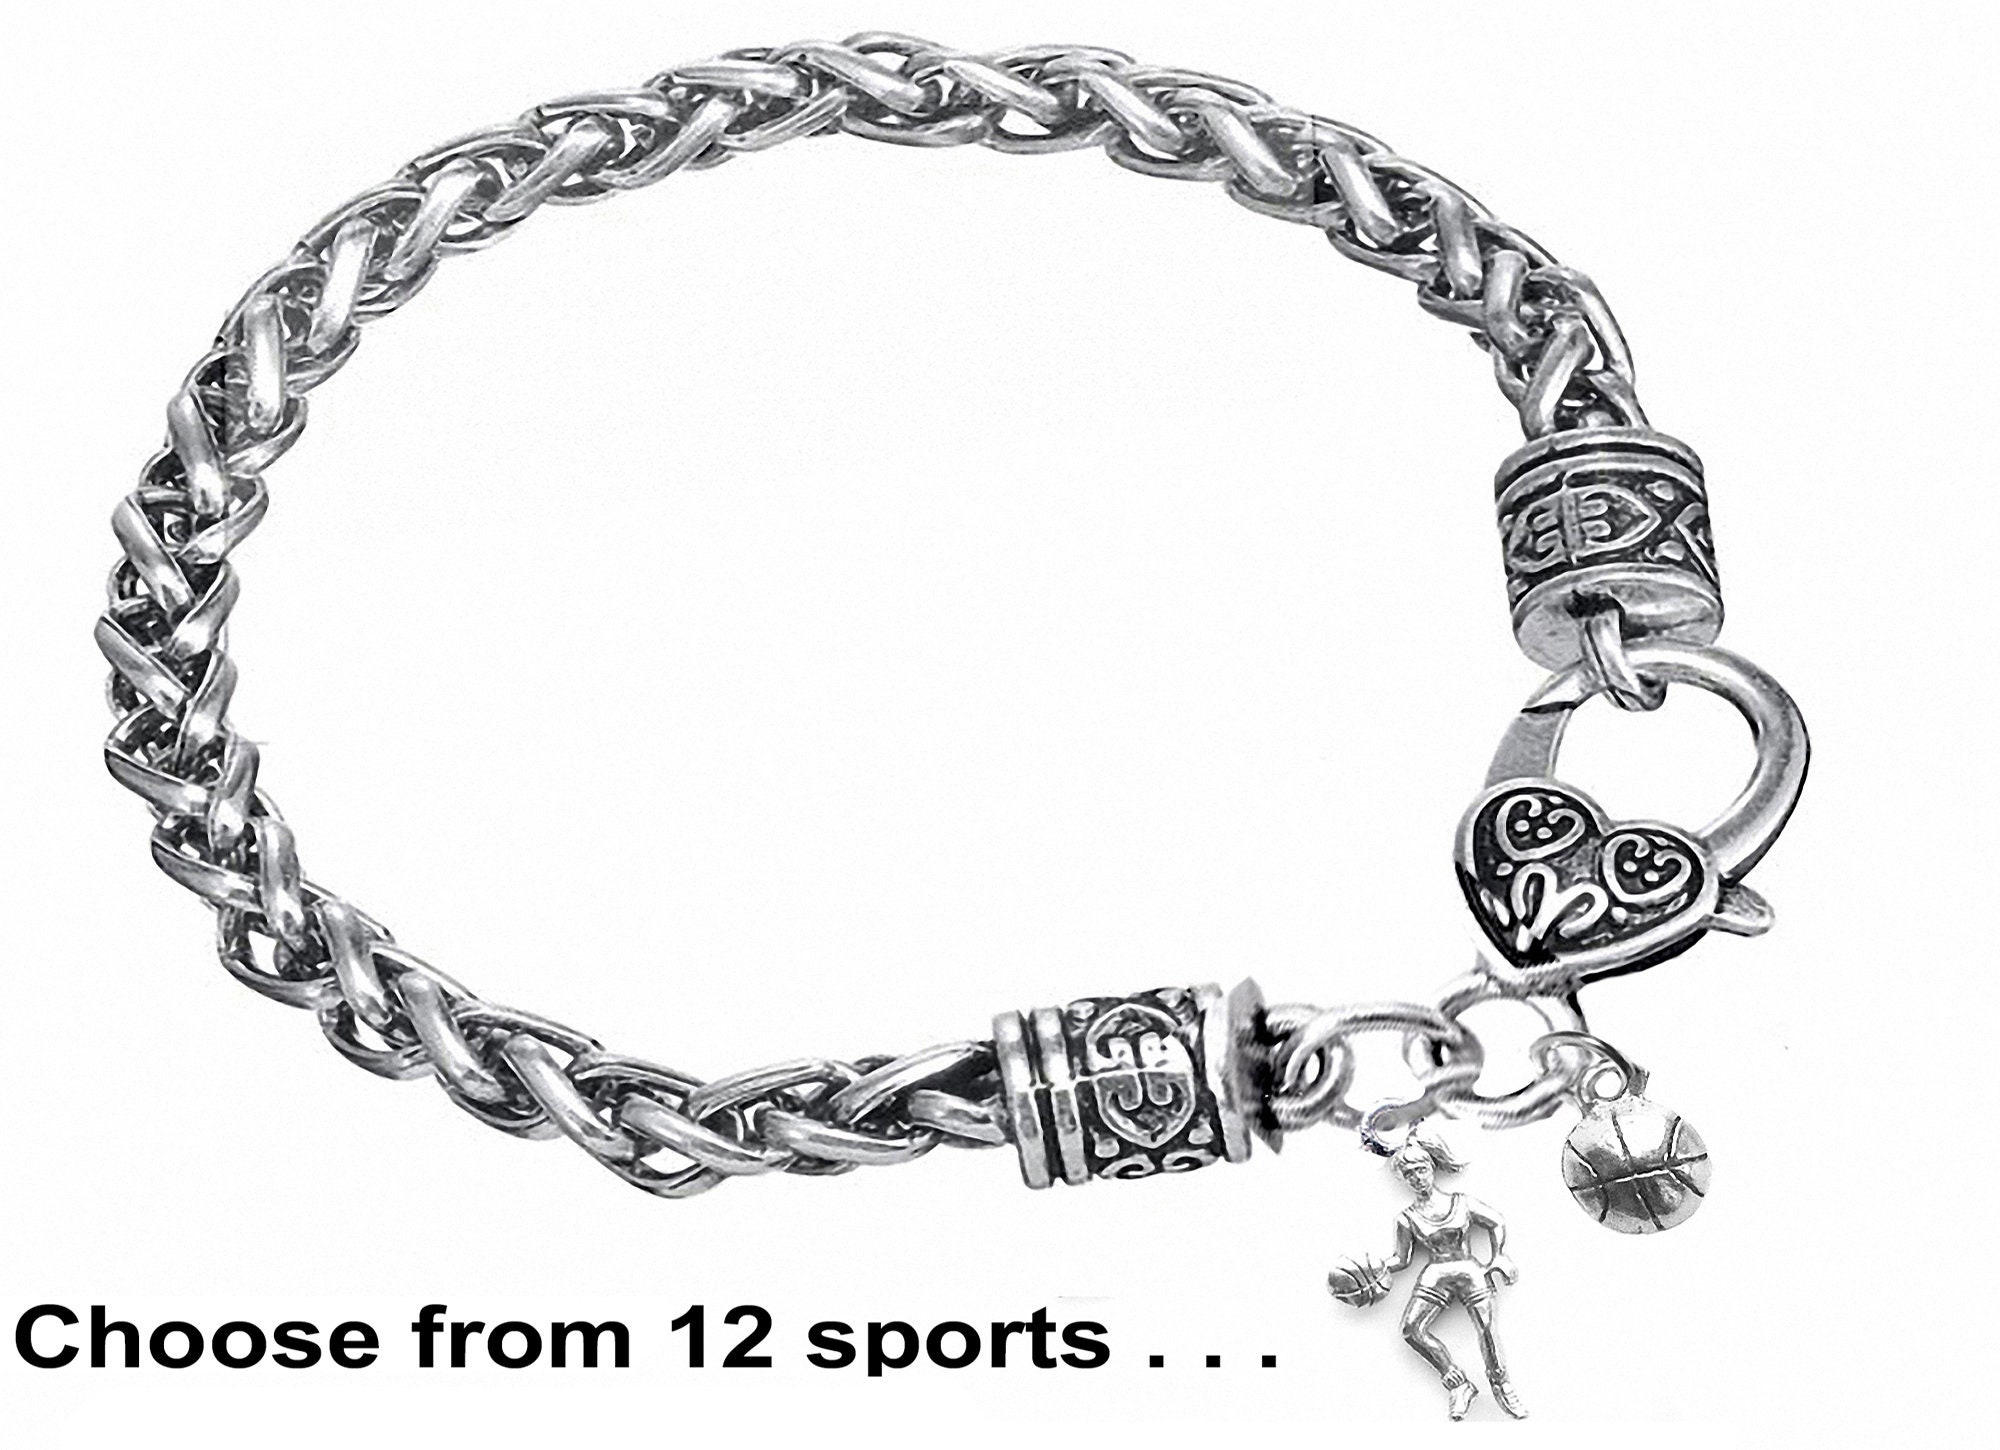 925 Silver Pandora Charm For Womens Bracelets DIY Pendant With Sports Game  And Food Alphabet Beads For Bracelets From Cutepandora, $4.83 | DHgate.Com